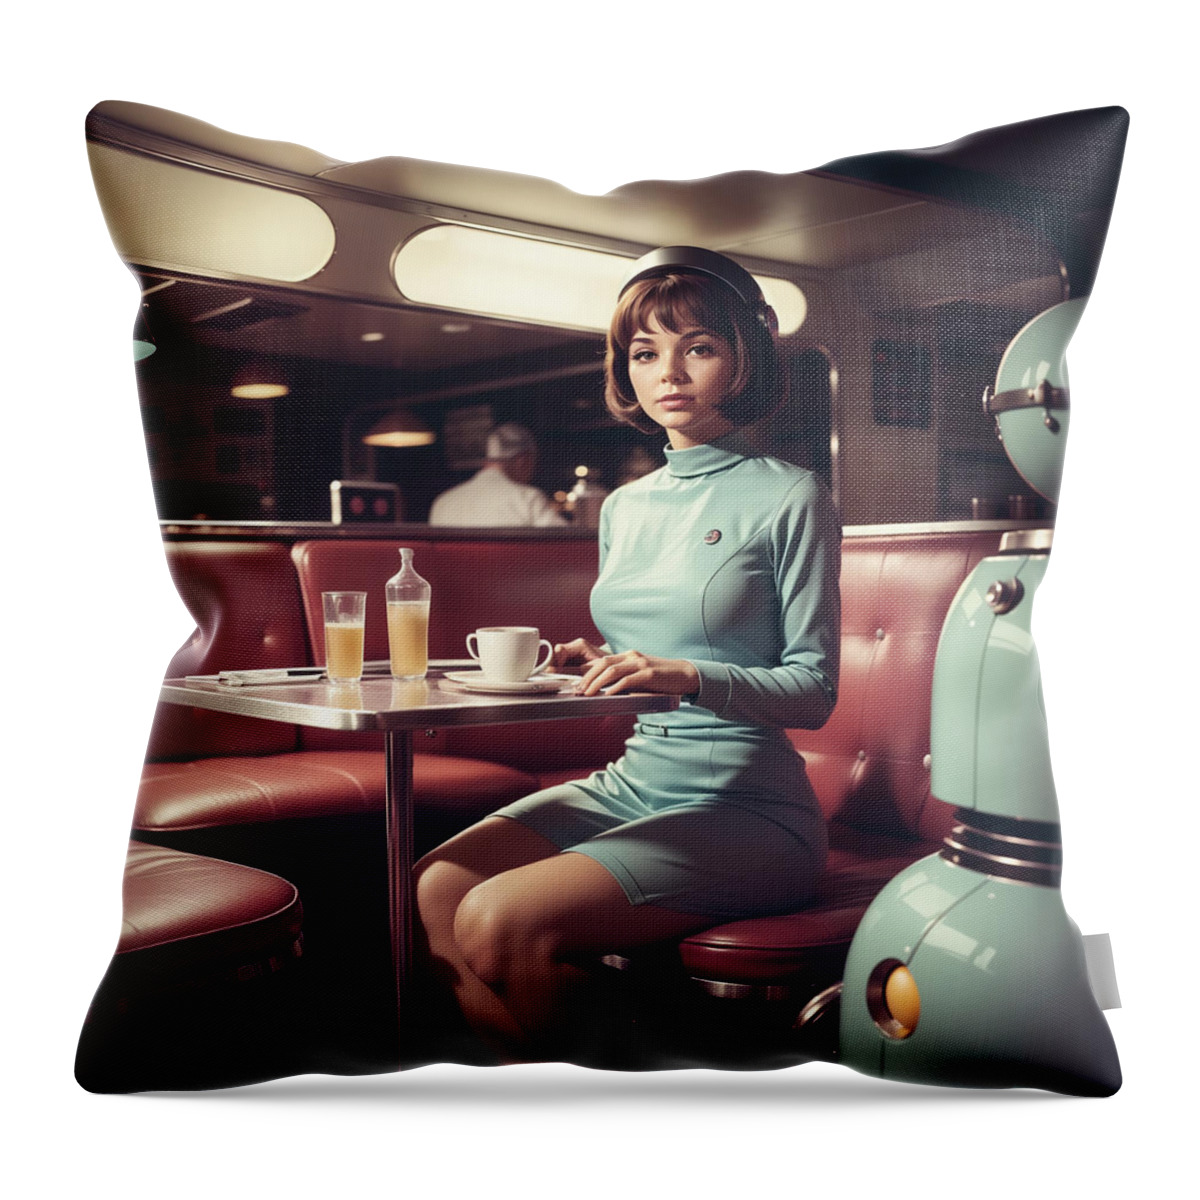 Eating At A Diner Throw Pillow featuring the digital art Eating at a diner by Quik Digicon Art Club